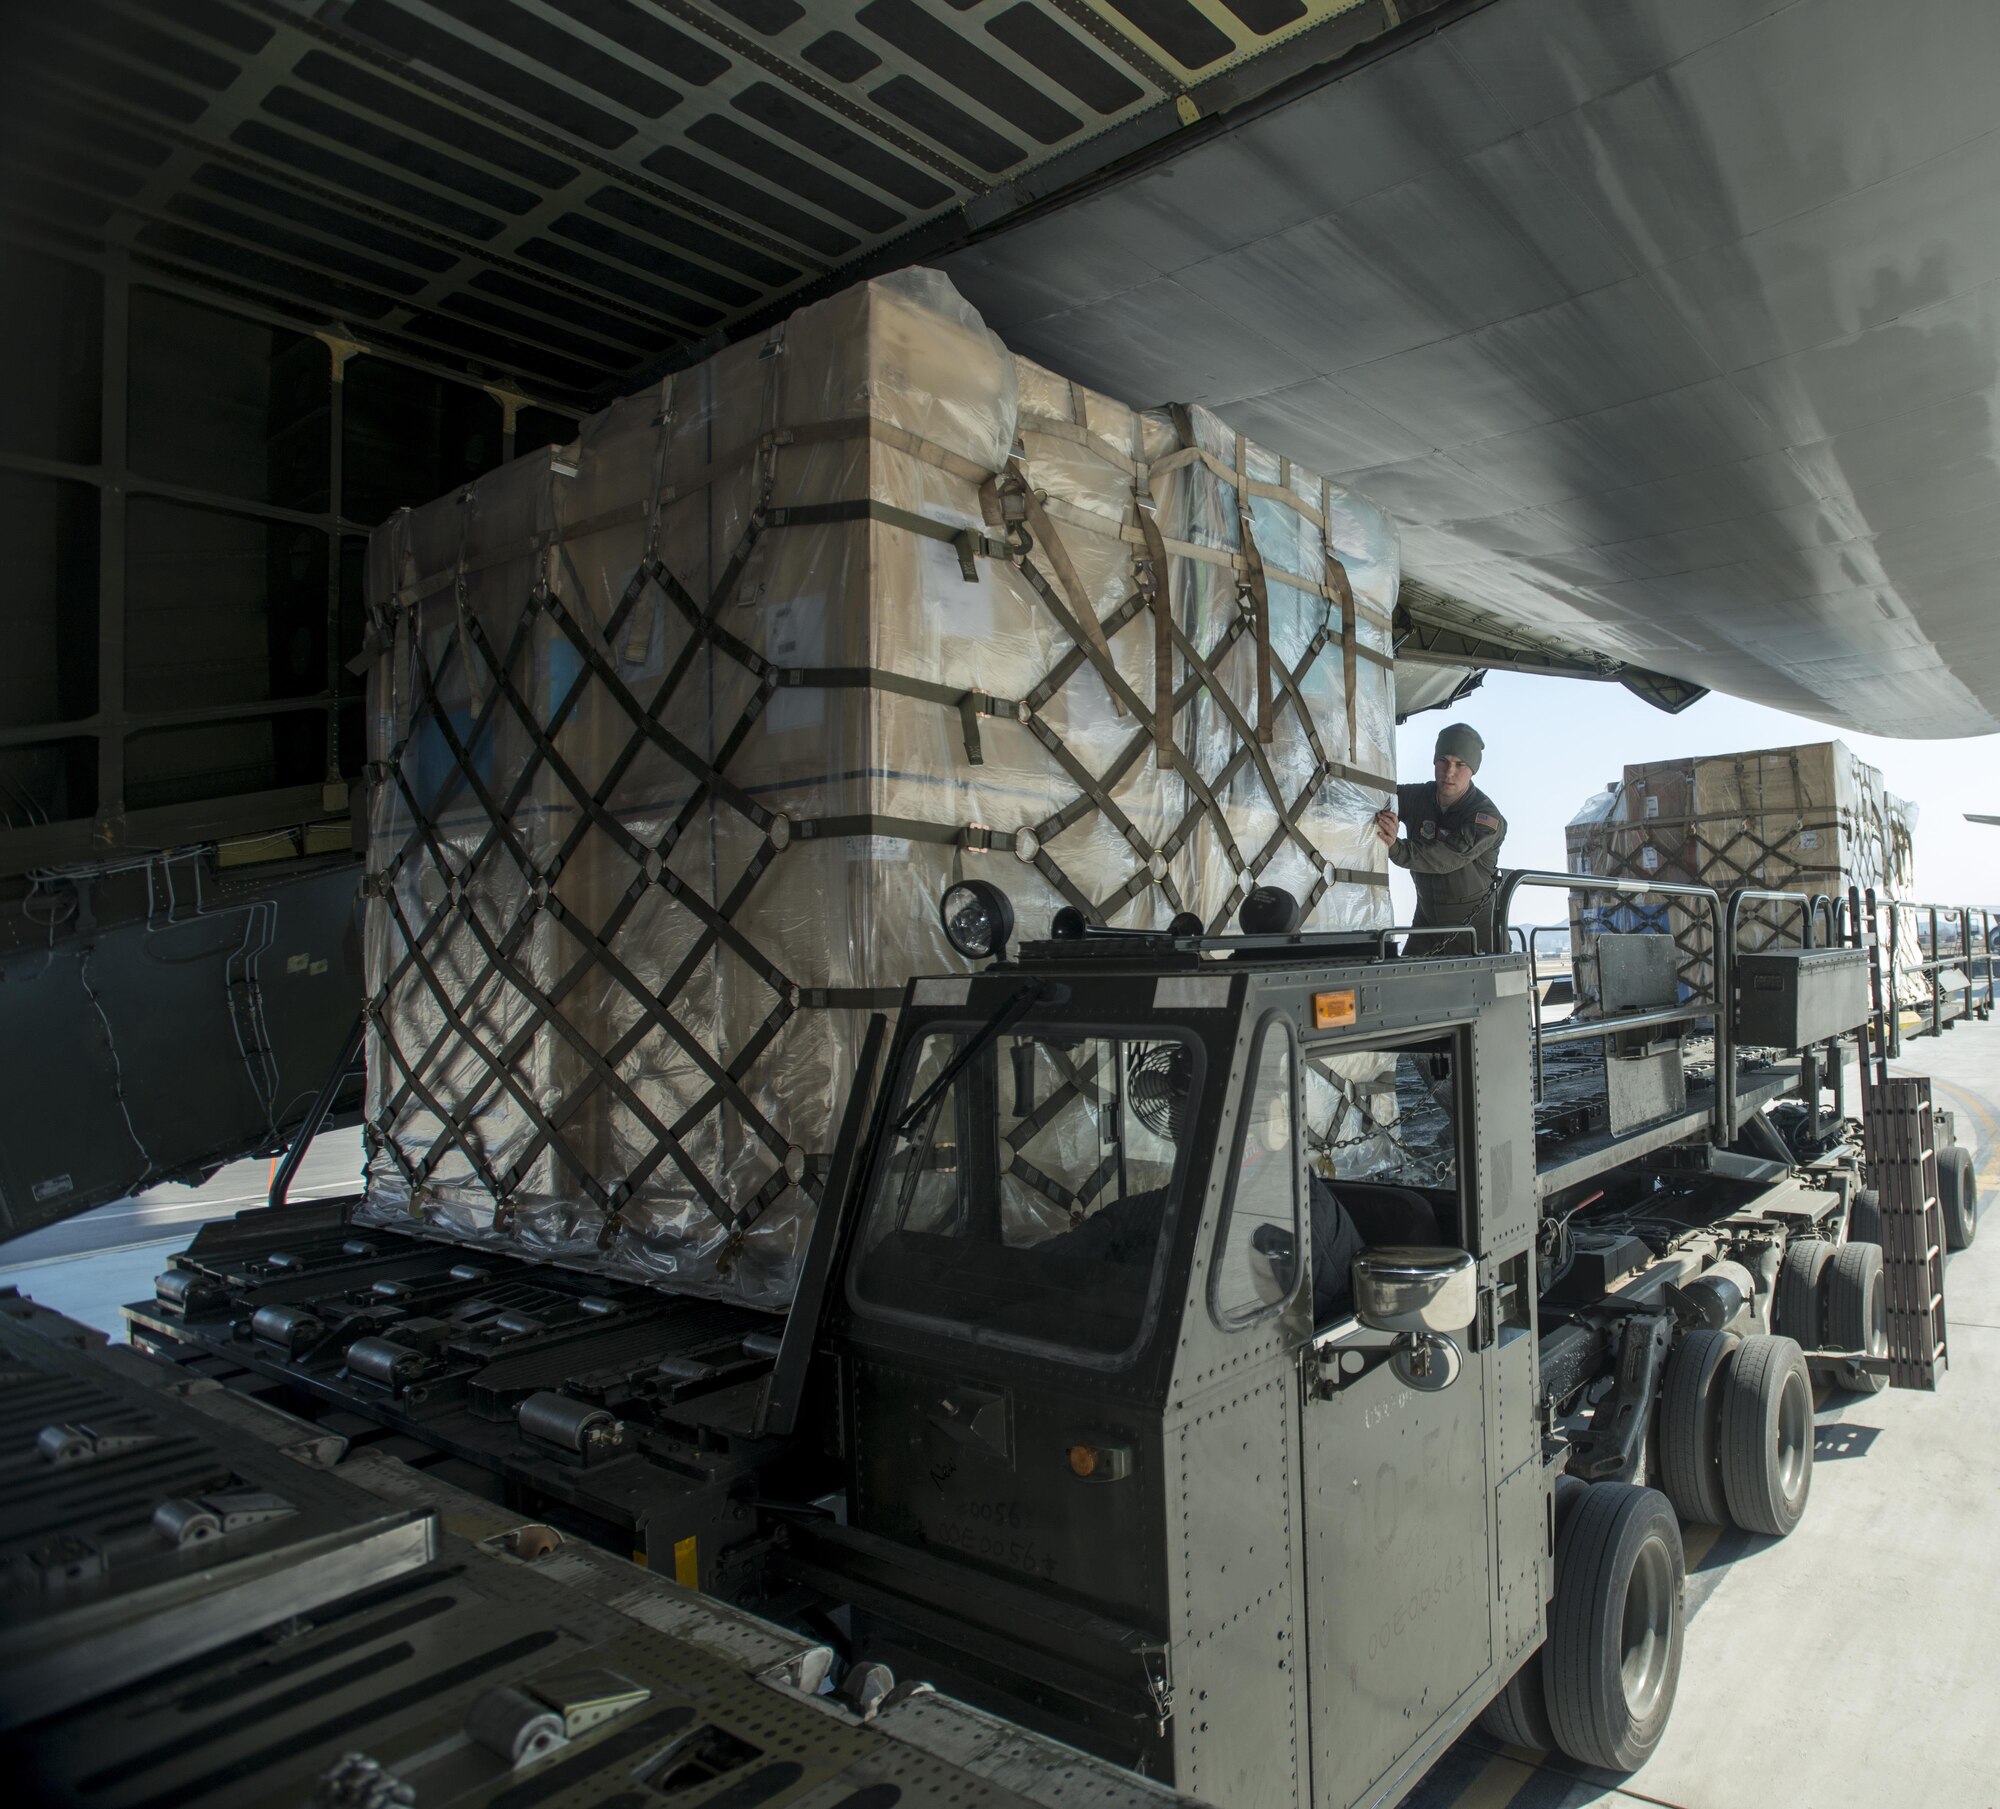 Senior Airman Elias Wilson, 22nd Airlift Squadron, loads pallets of household goods March 7, 2017, at Osan Air Base, South Korea. A total of 14 pallets of household goods were returned back to the United States for service members who are being reassigned duty stations. (U.S. Air Force photo by Staff Sgt. Nicole Leidholm)